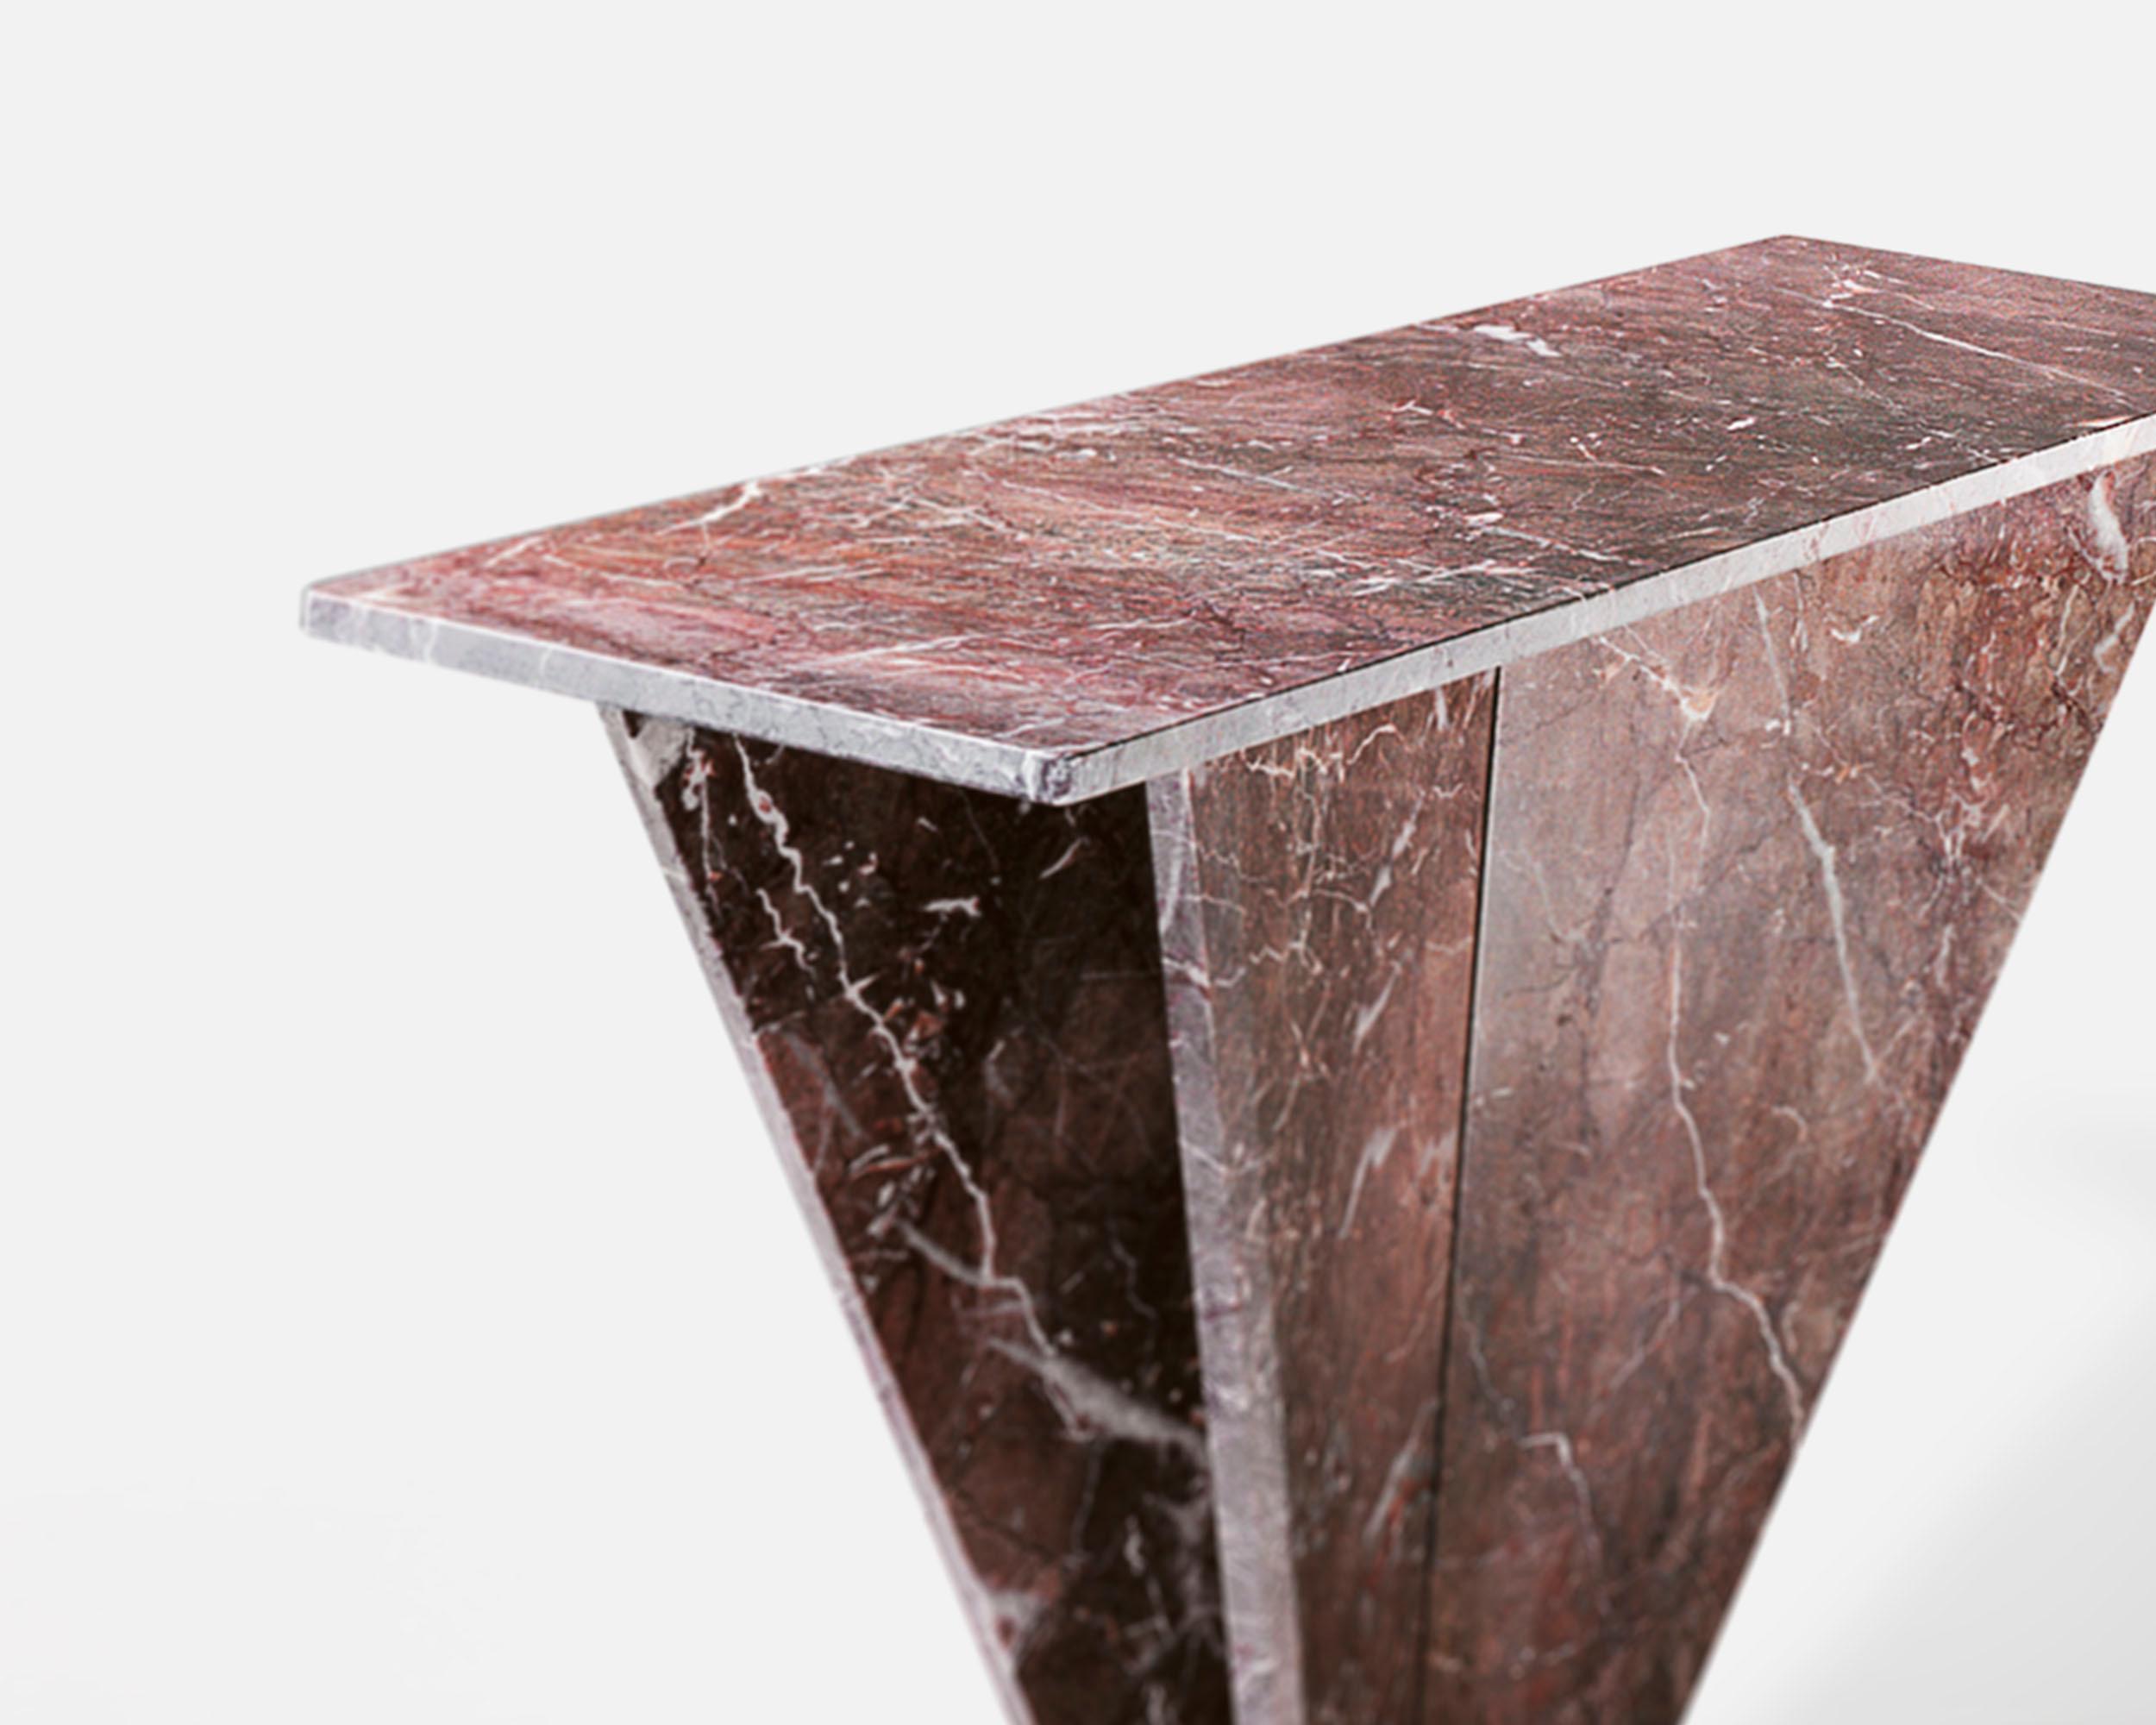 'Traccia' console in marble
Design by Mario Bellini,
1970s

Dimensions: H 86 cm, L 100 cm, W 40
Material: black marble / white marble / red marble / or more.

Customization: 
This console is still produced by manufacturers in Italy. 
Customer can